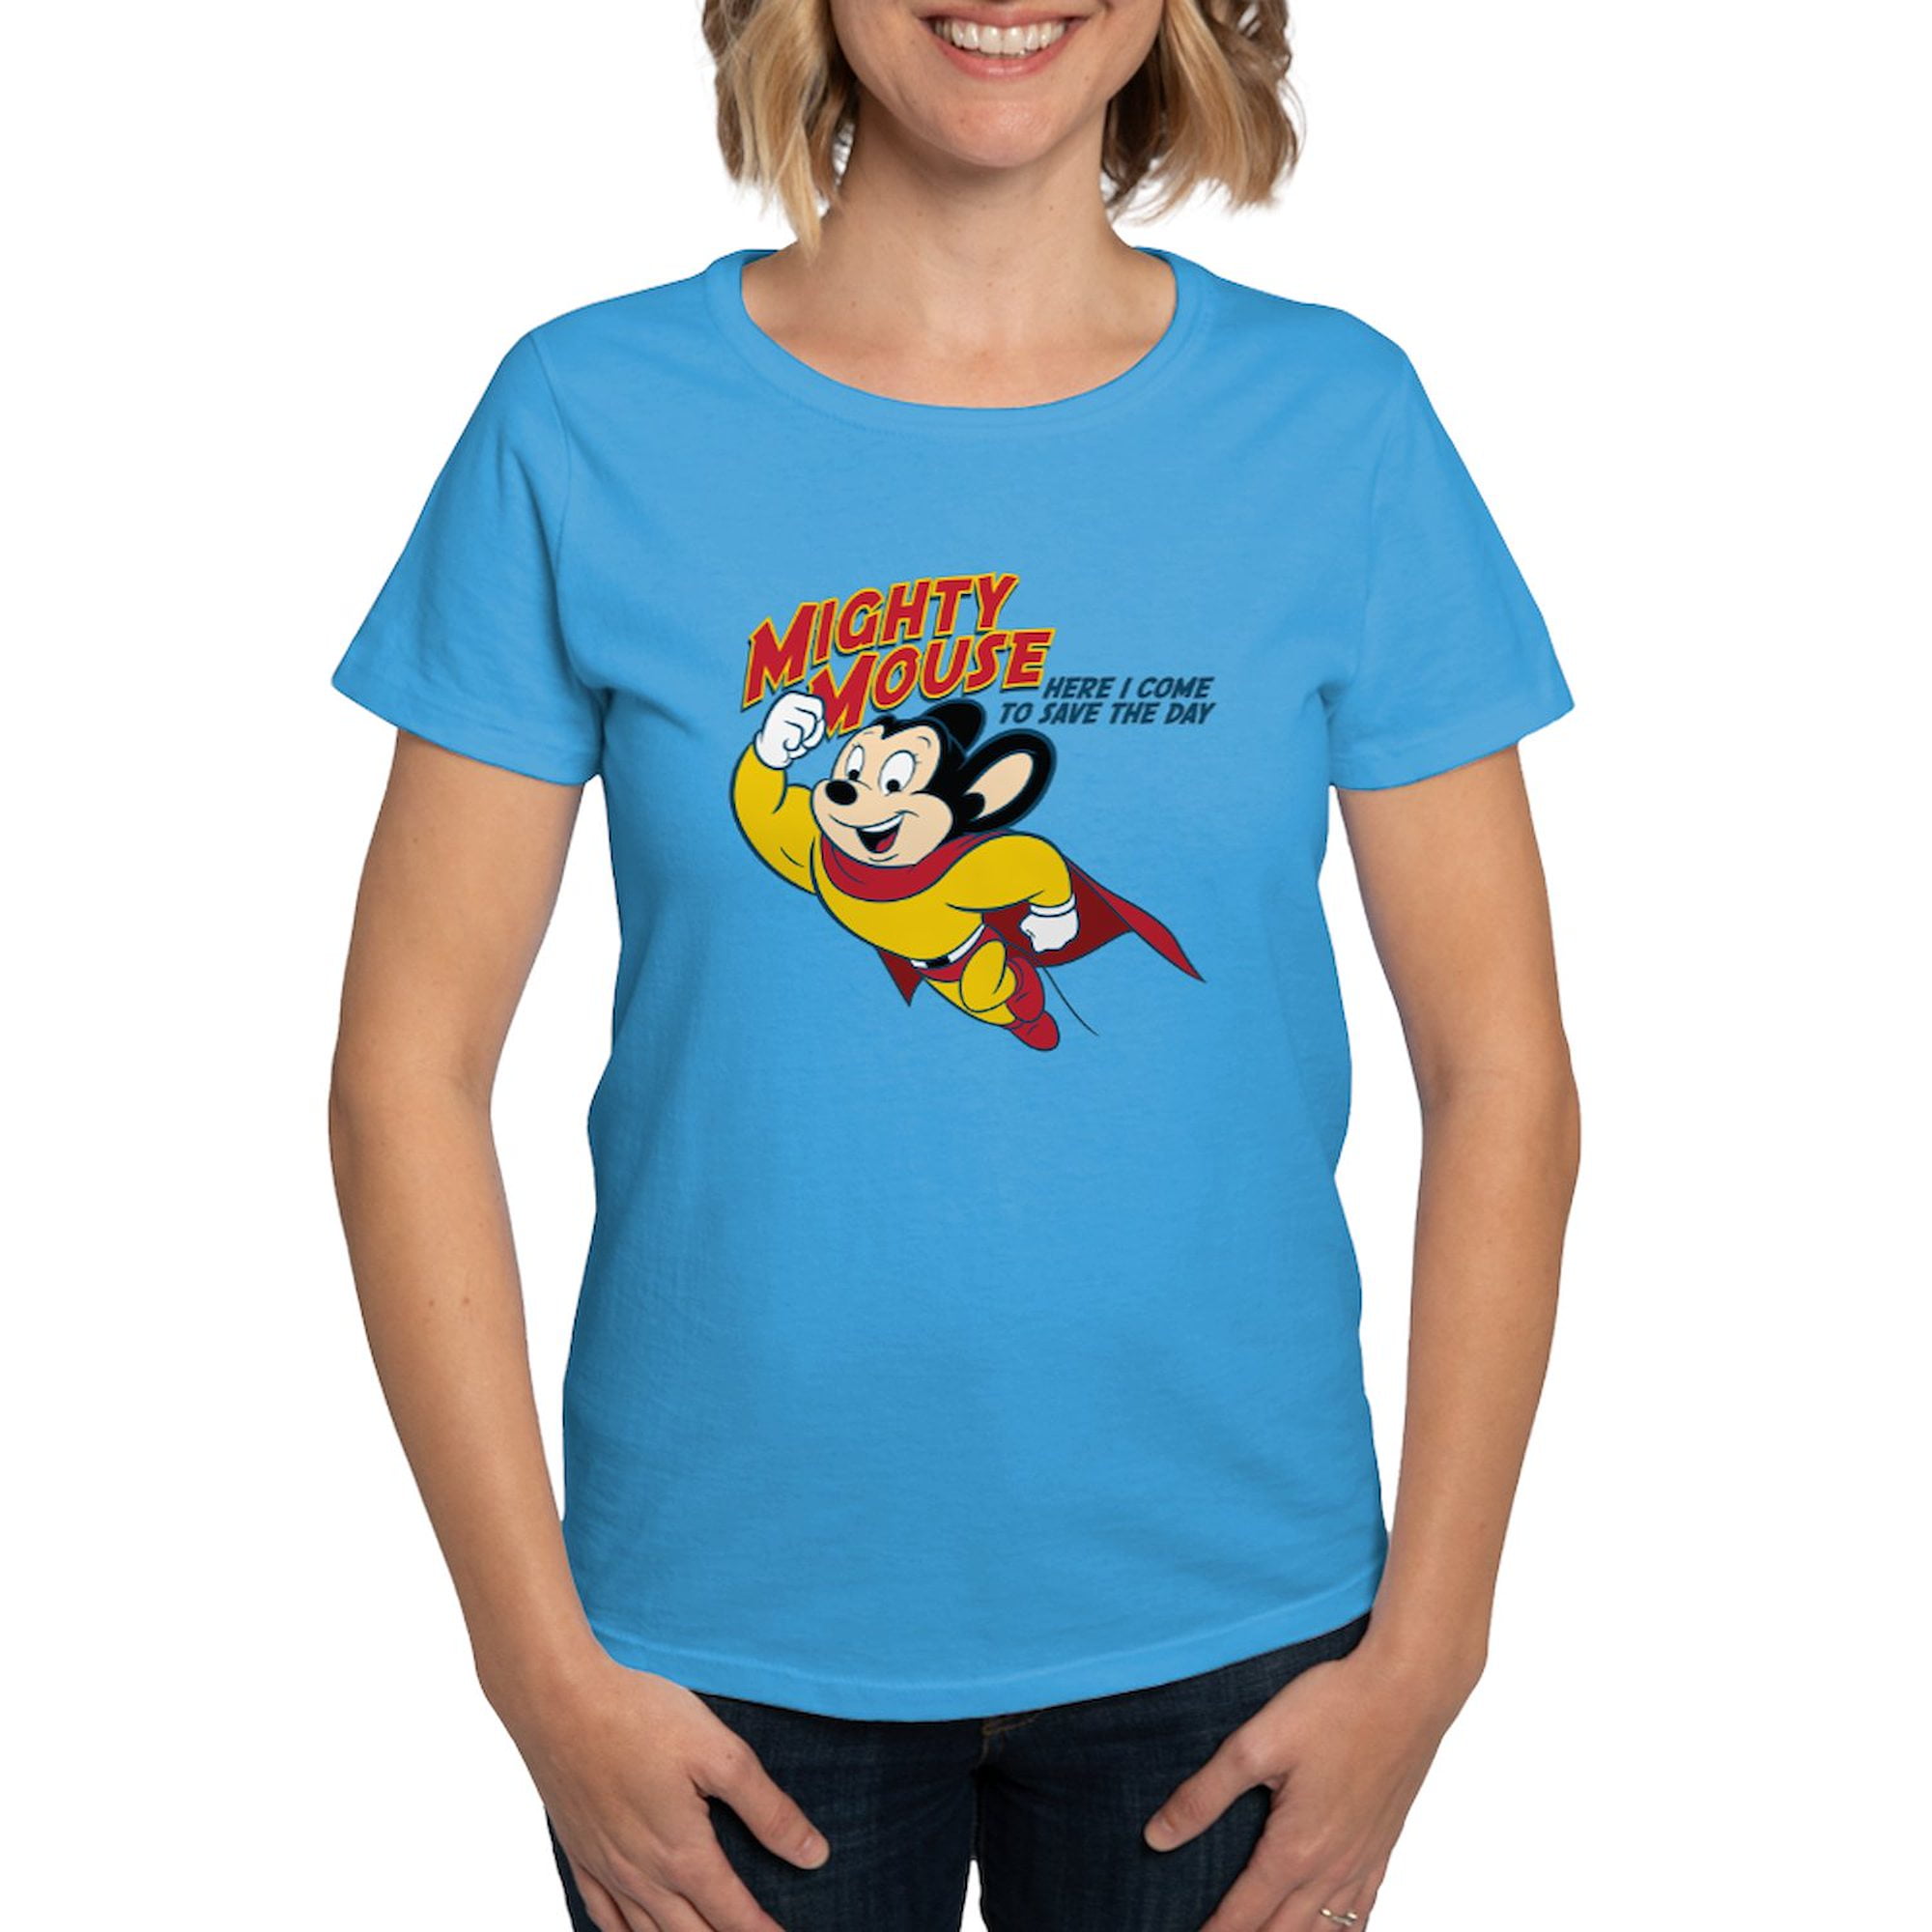 CafePress - Mighty Mouse T Shirt - Women's Traditional Fit Dark T-Shirt ...